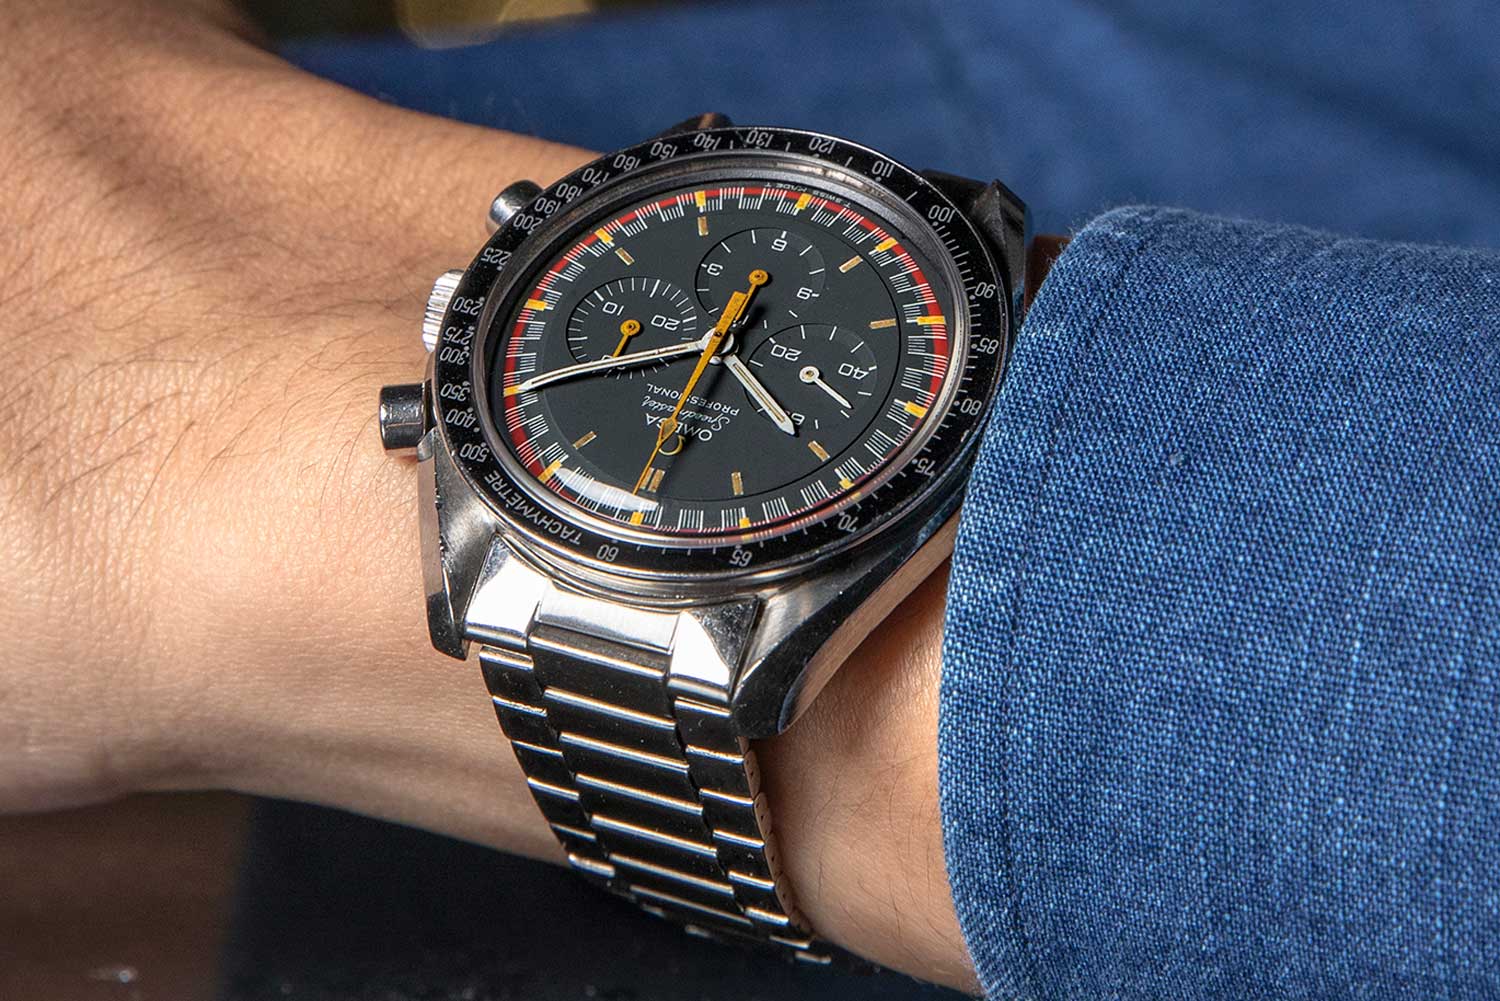 The Speedmaster Reference 145.022-69 with the Racing Dial is the single most expensive watch in Revolution’s collection and also one of the most important to Wei.